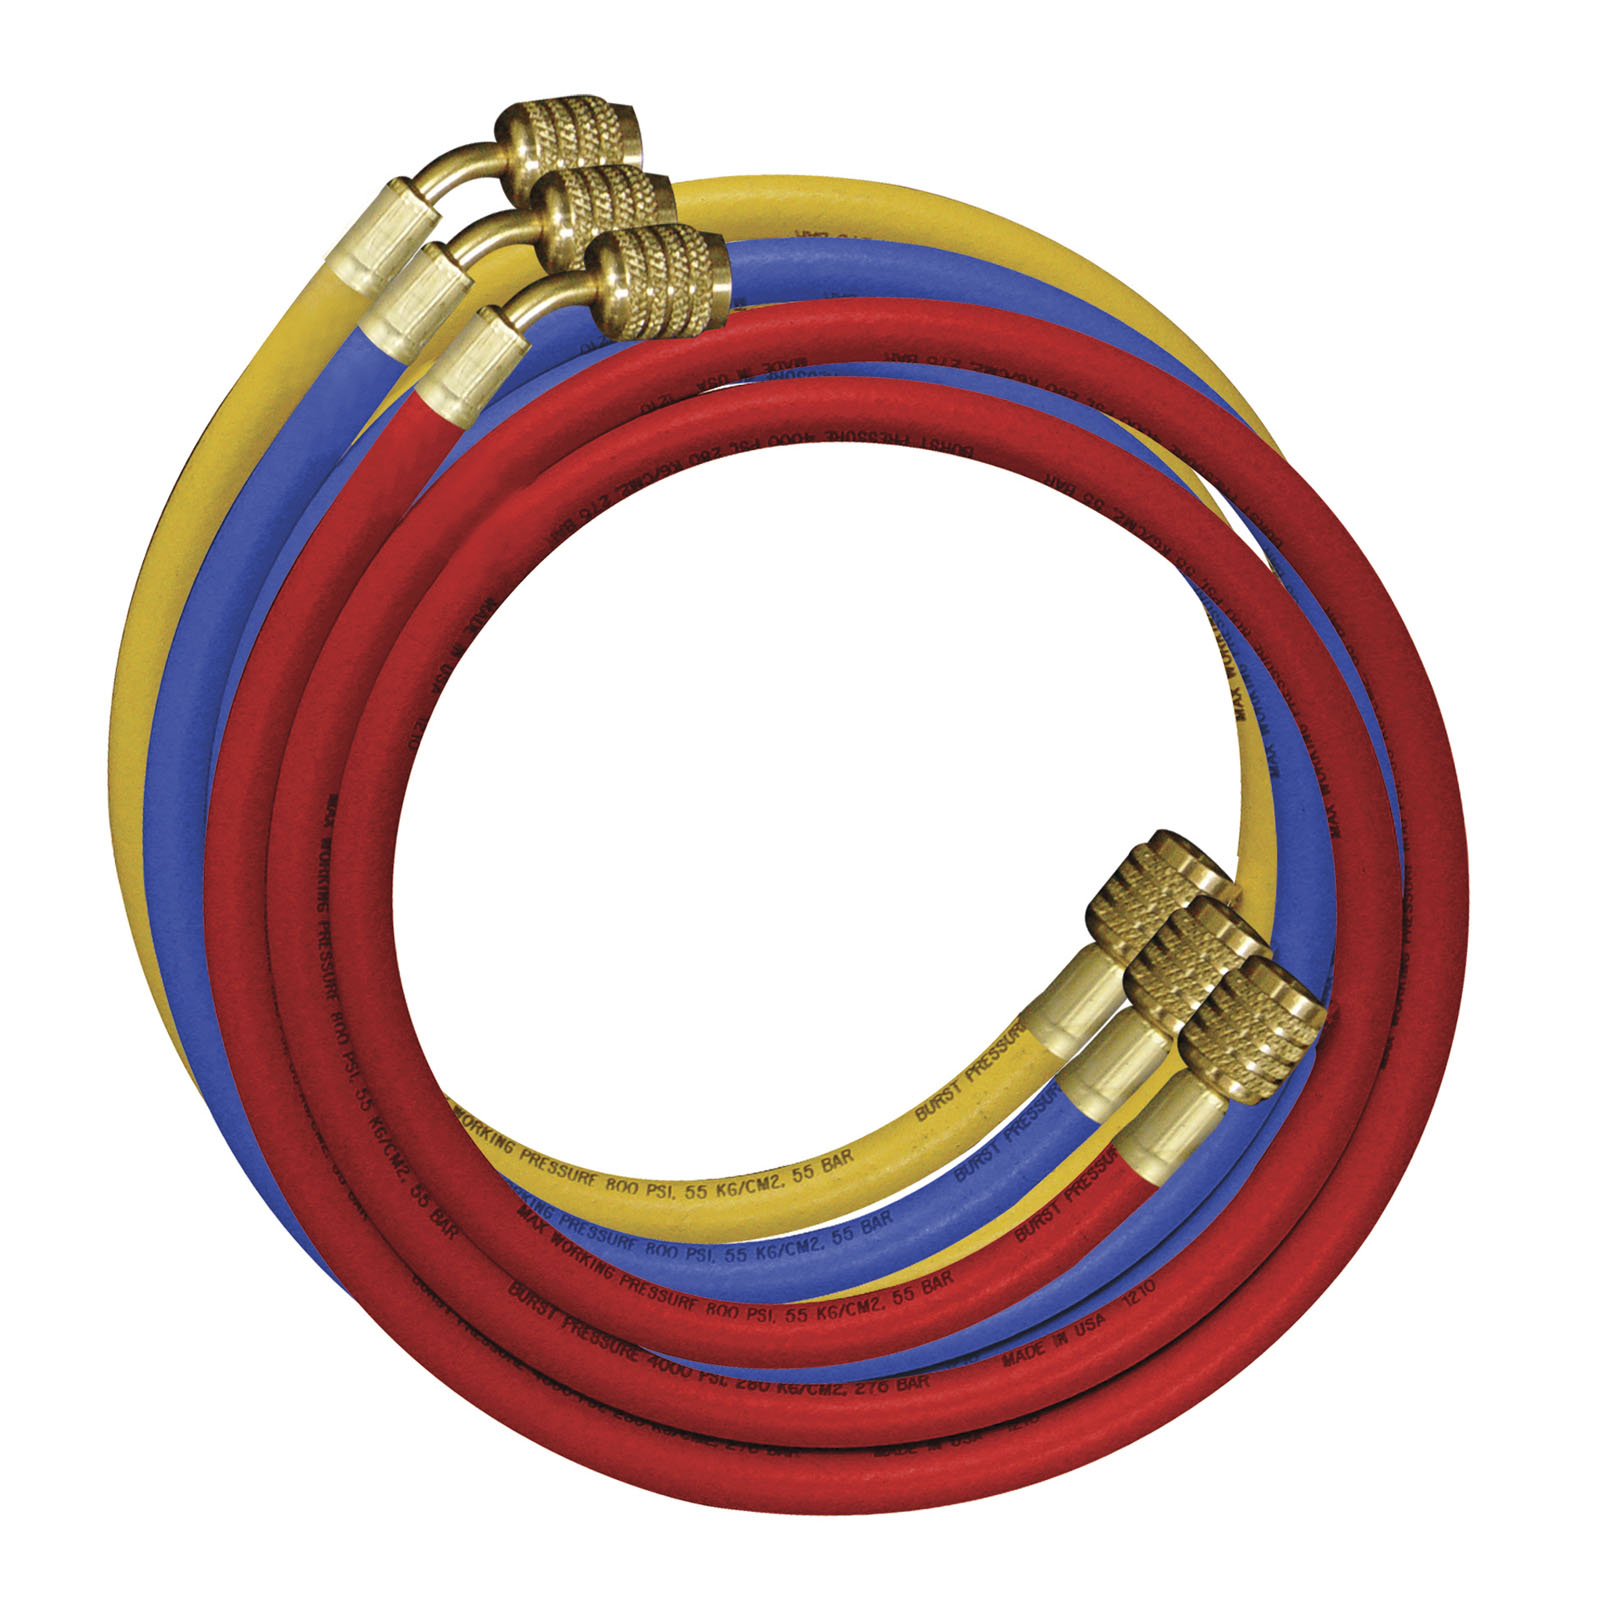 3pcs LIYYOO Air Conditioning Refrigerant Charging Hoses with Diagnostic Manifold Gauge Set and 2 Quick Coupler for R410A R22 R404 Refrigerant Charging,1/4 Thread Hose Set 60 Red/Yellow/Blue 